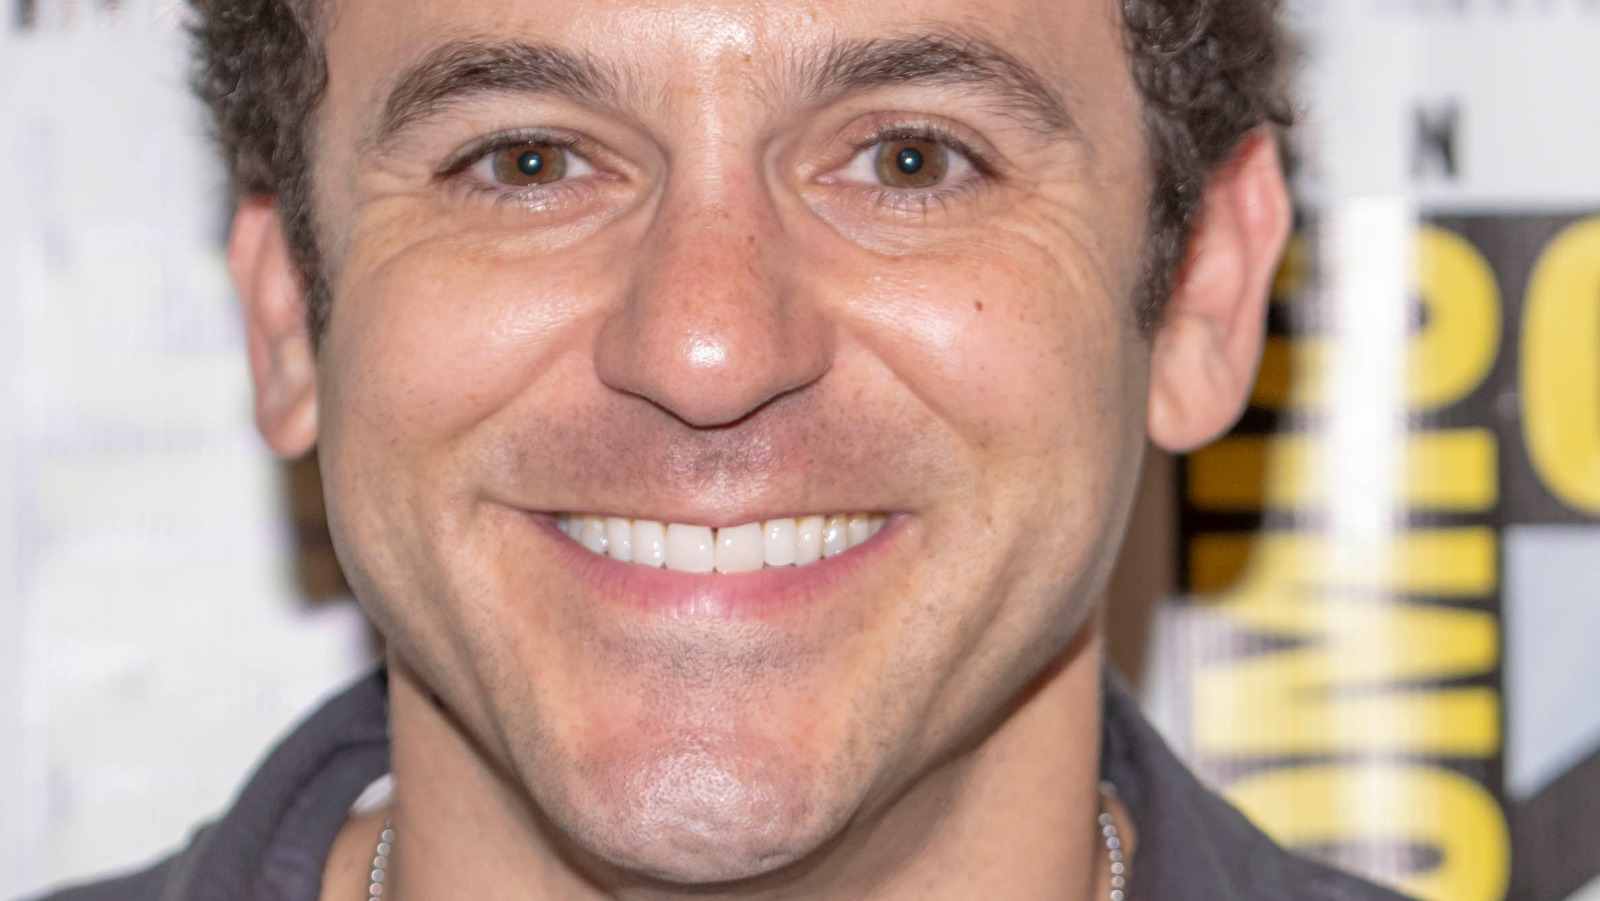 Troubling Details About Fred Savage’s On-Set Behavior Have Come To Light